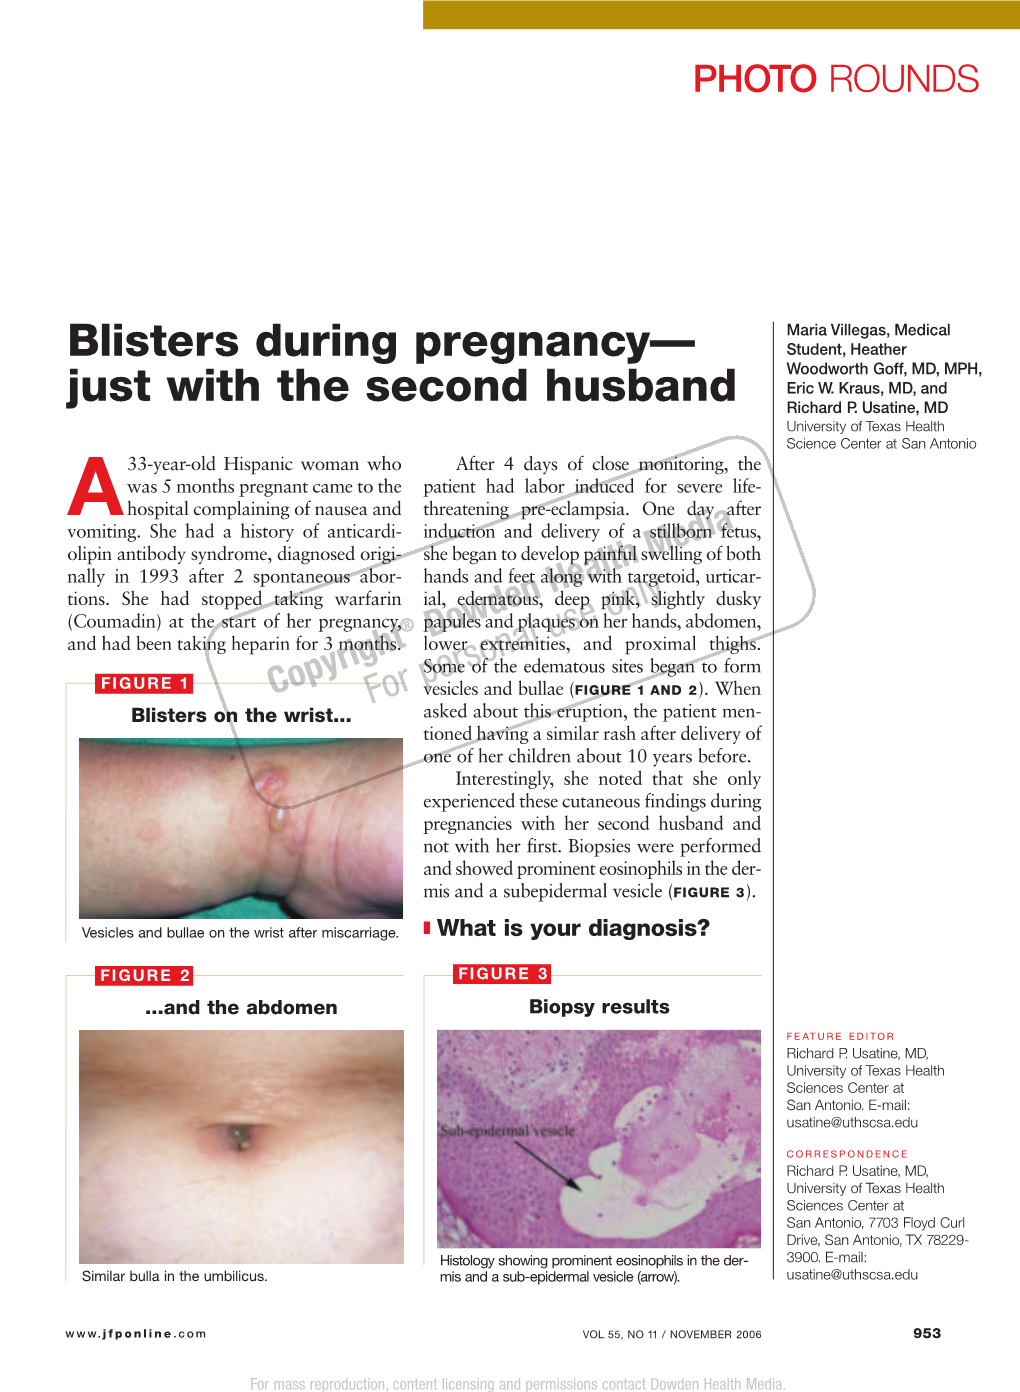 Blisters During Pregnancy— Student, Heather Woodworth Goff, MD, MPH, Eric W